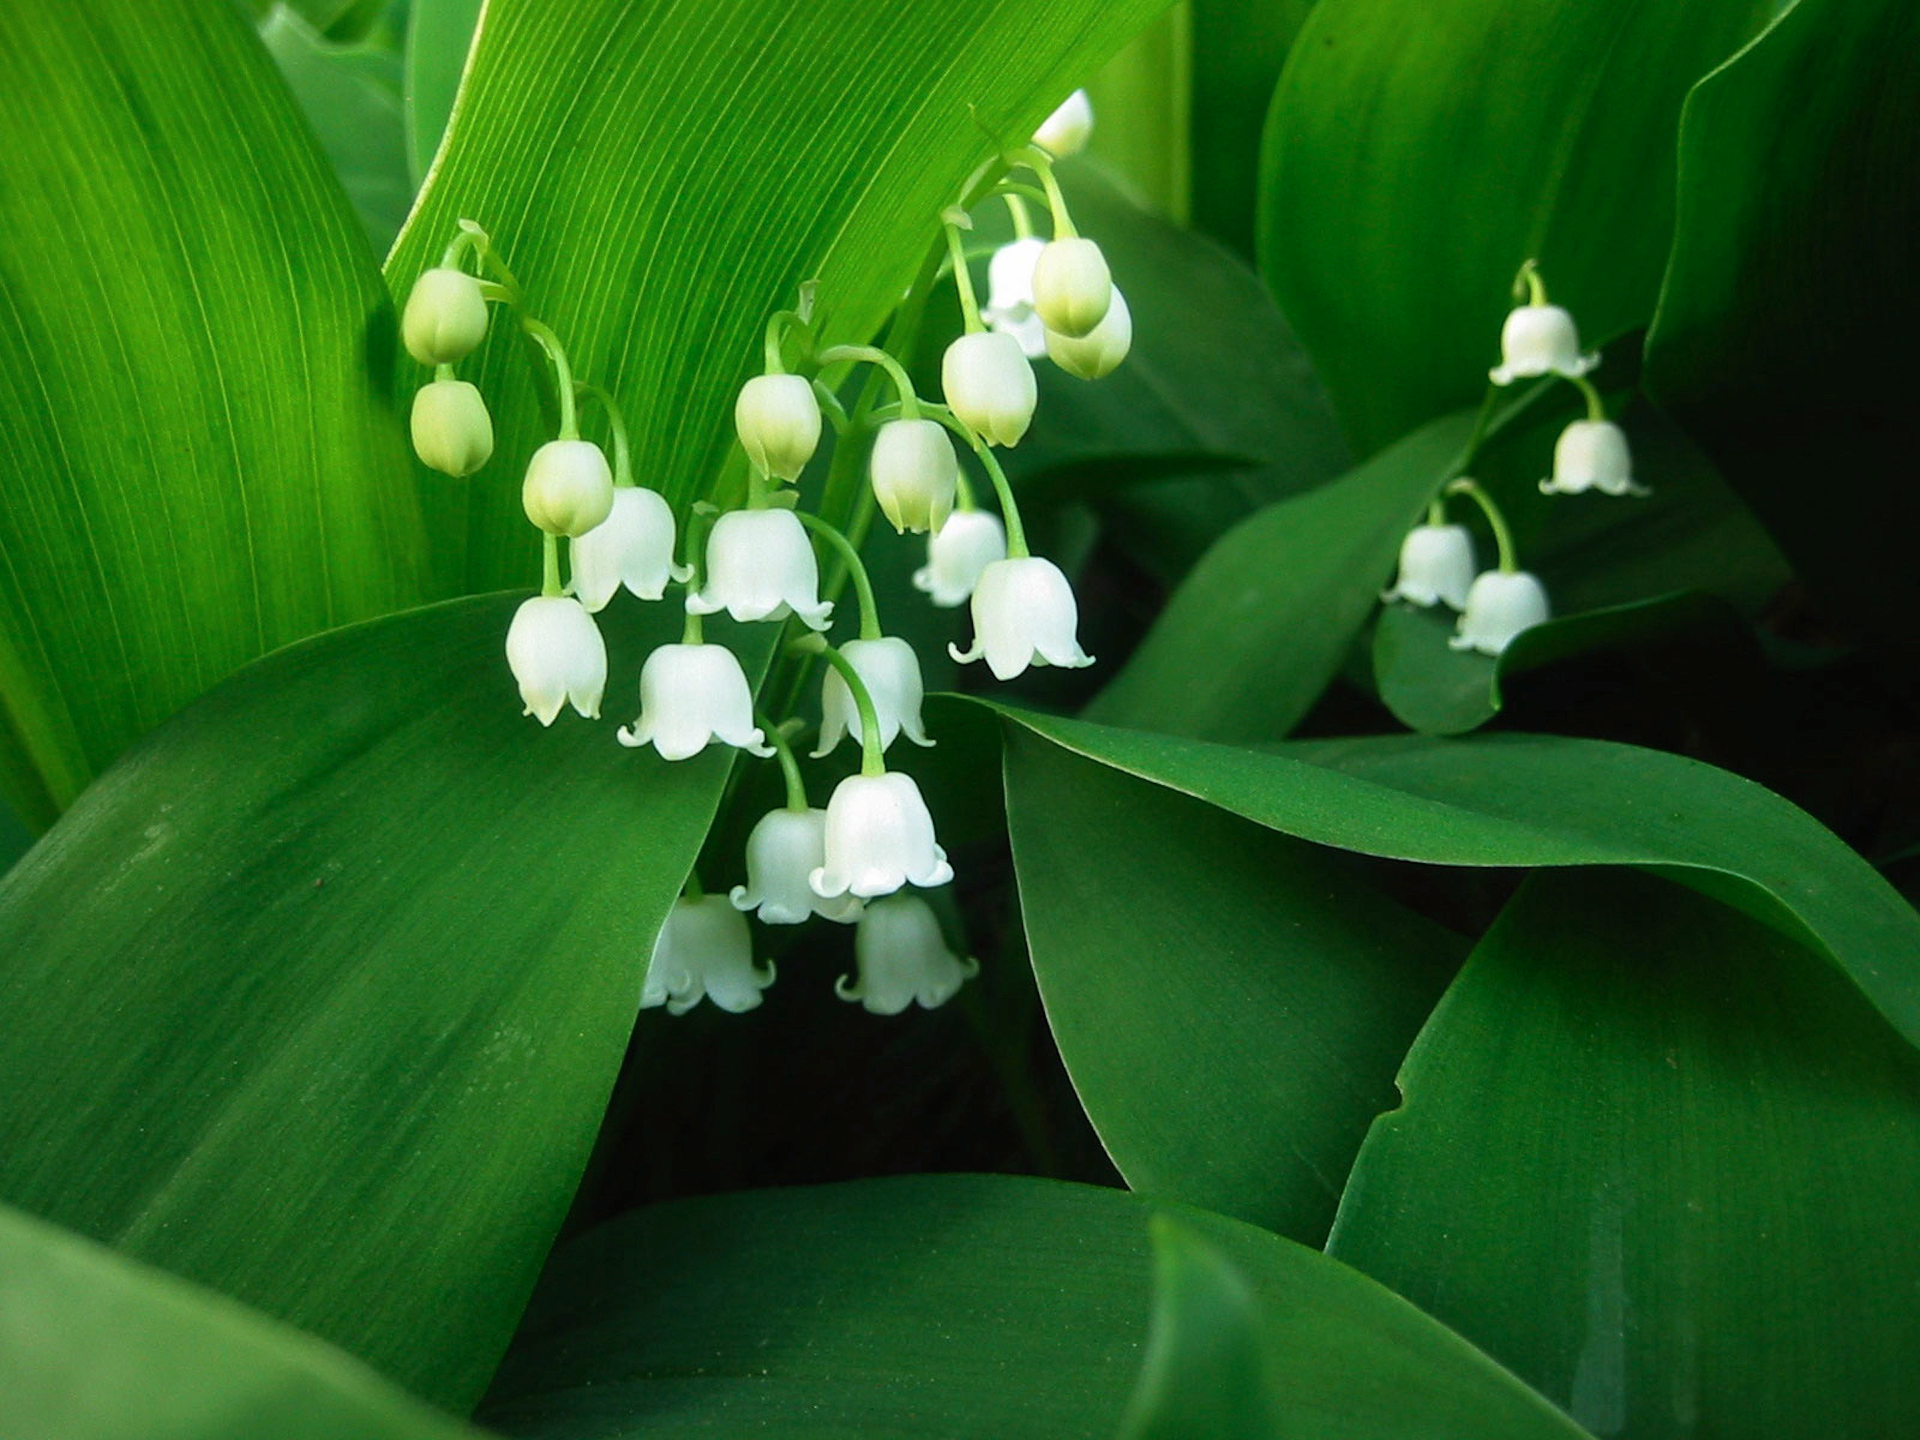 green, lily of the valley, earth, flower, white flower, flowers